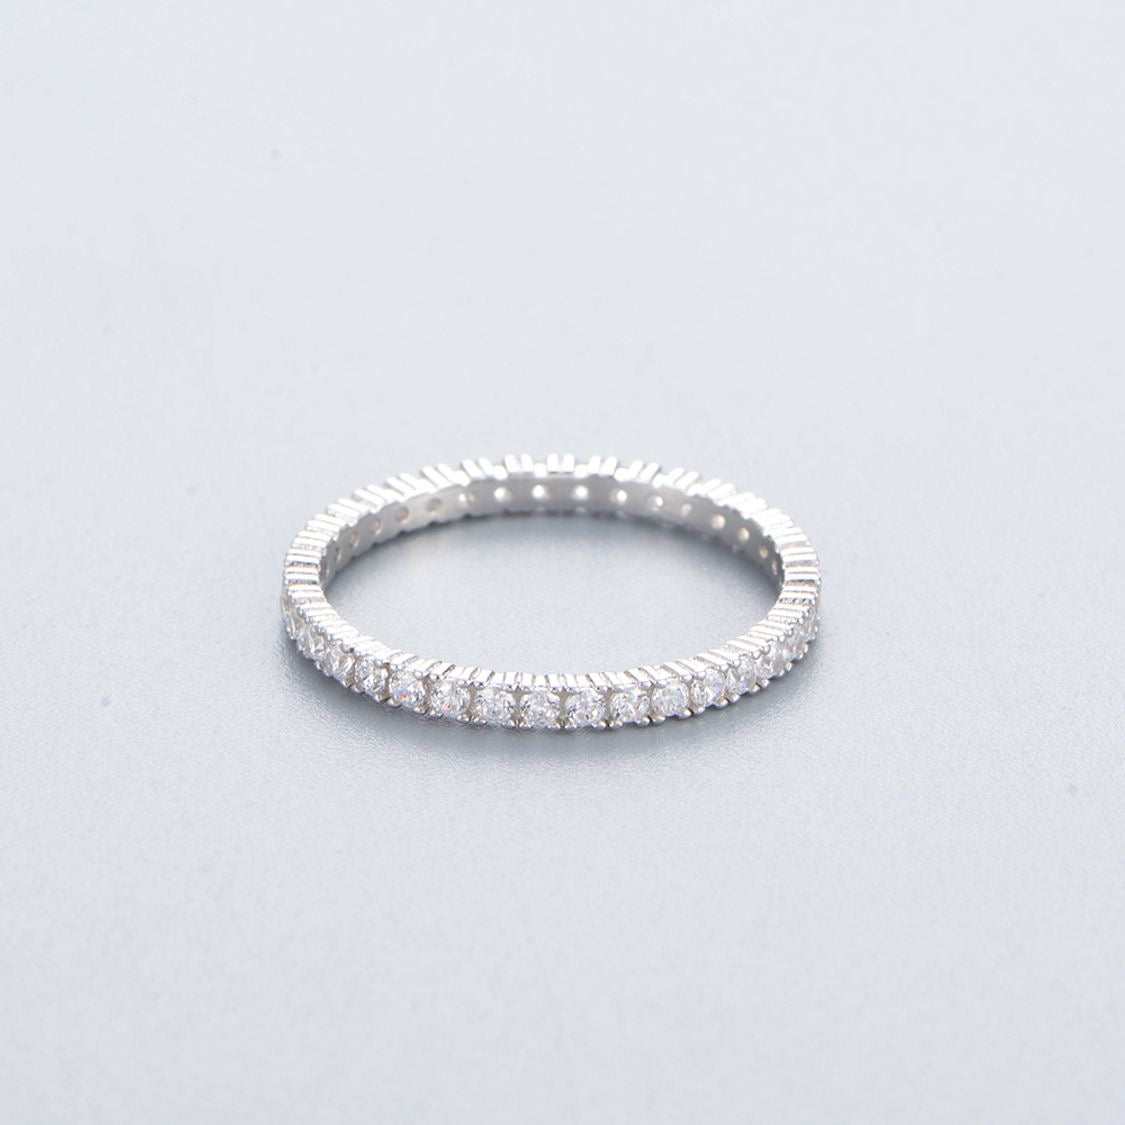 Narrow ring "Show" made of 925 silver with zirconia